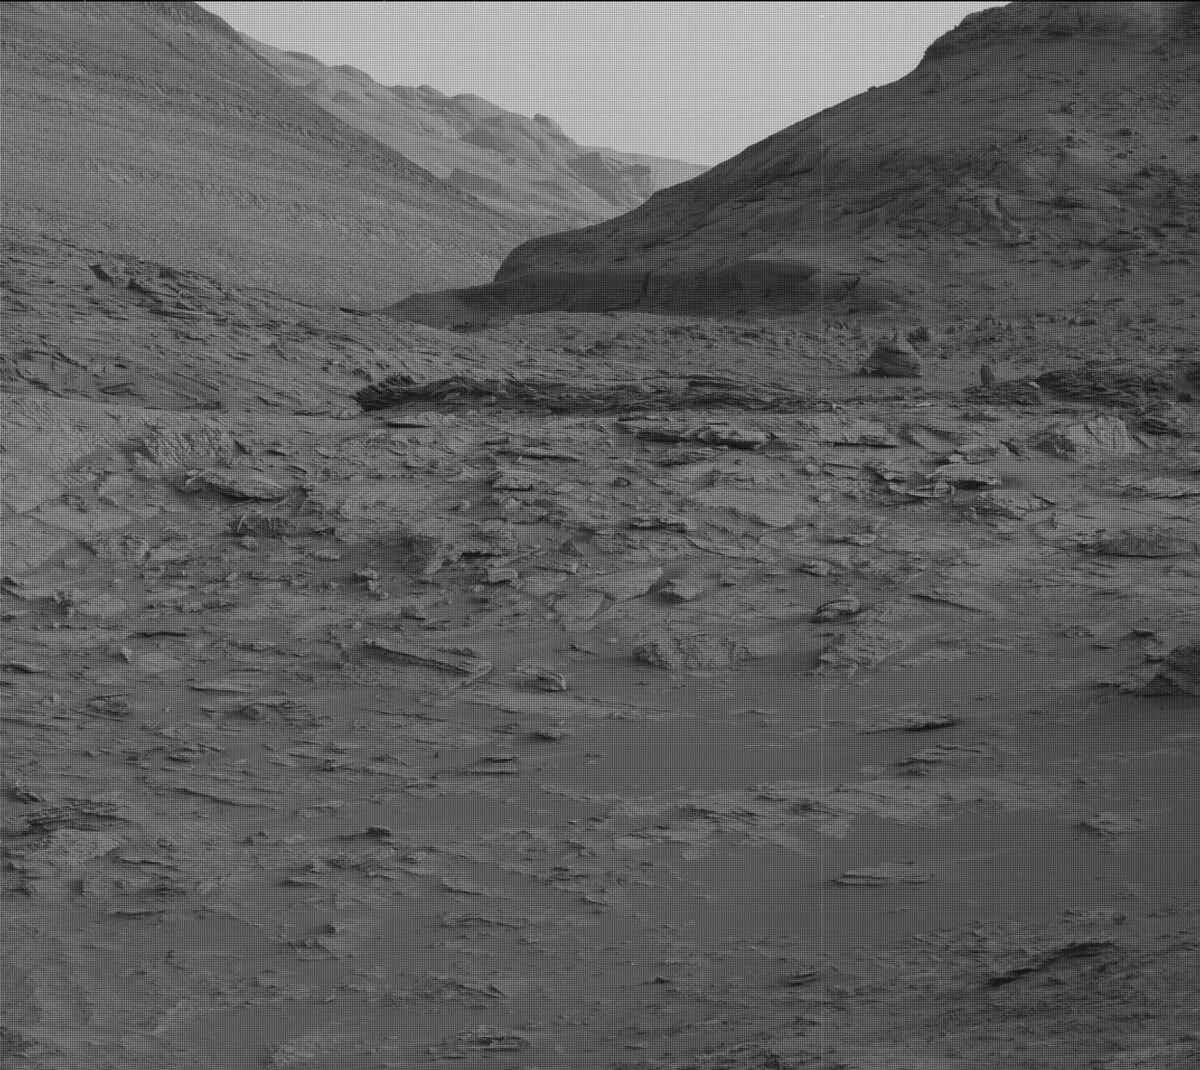 This image was taken by Mast Camera (Mastcam) onboard NASA's Mars rover Curiosity on Sol 3483.